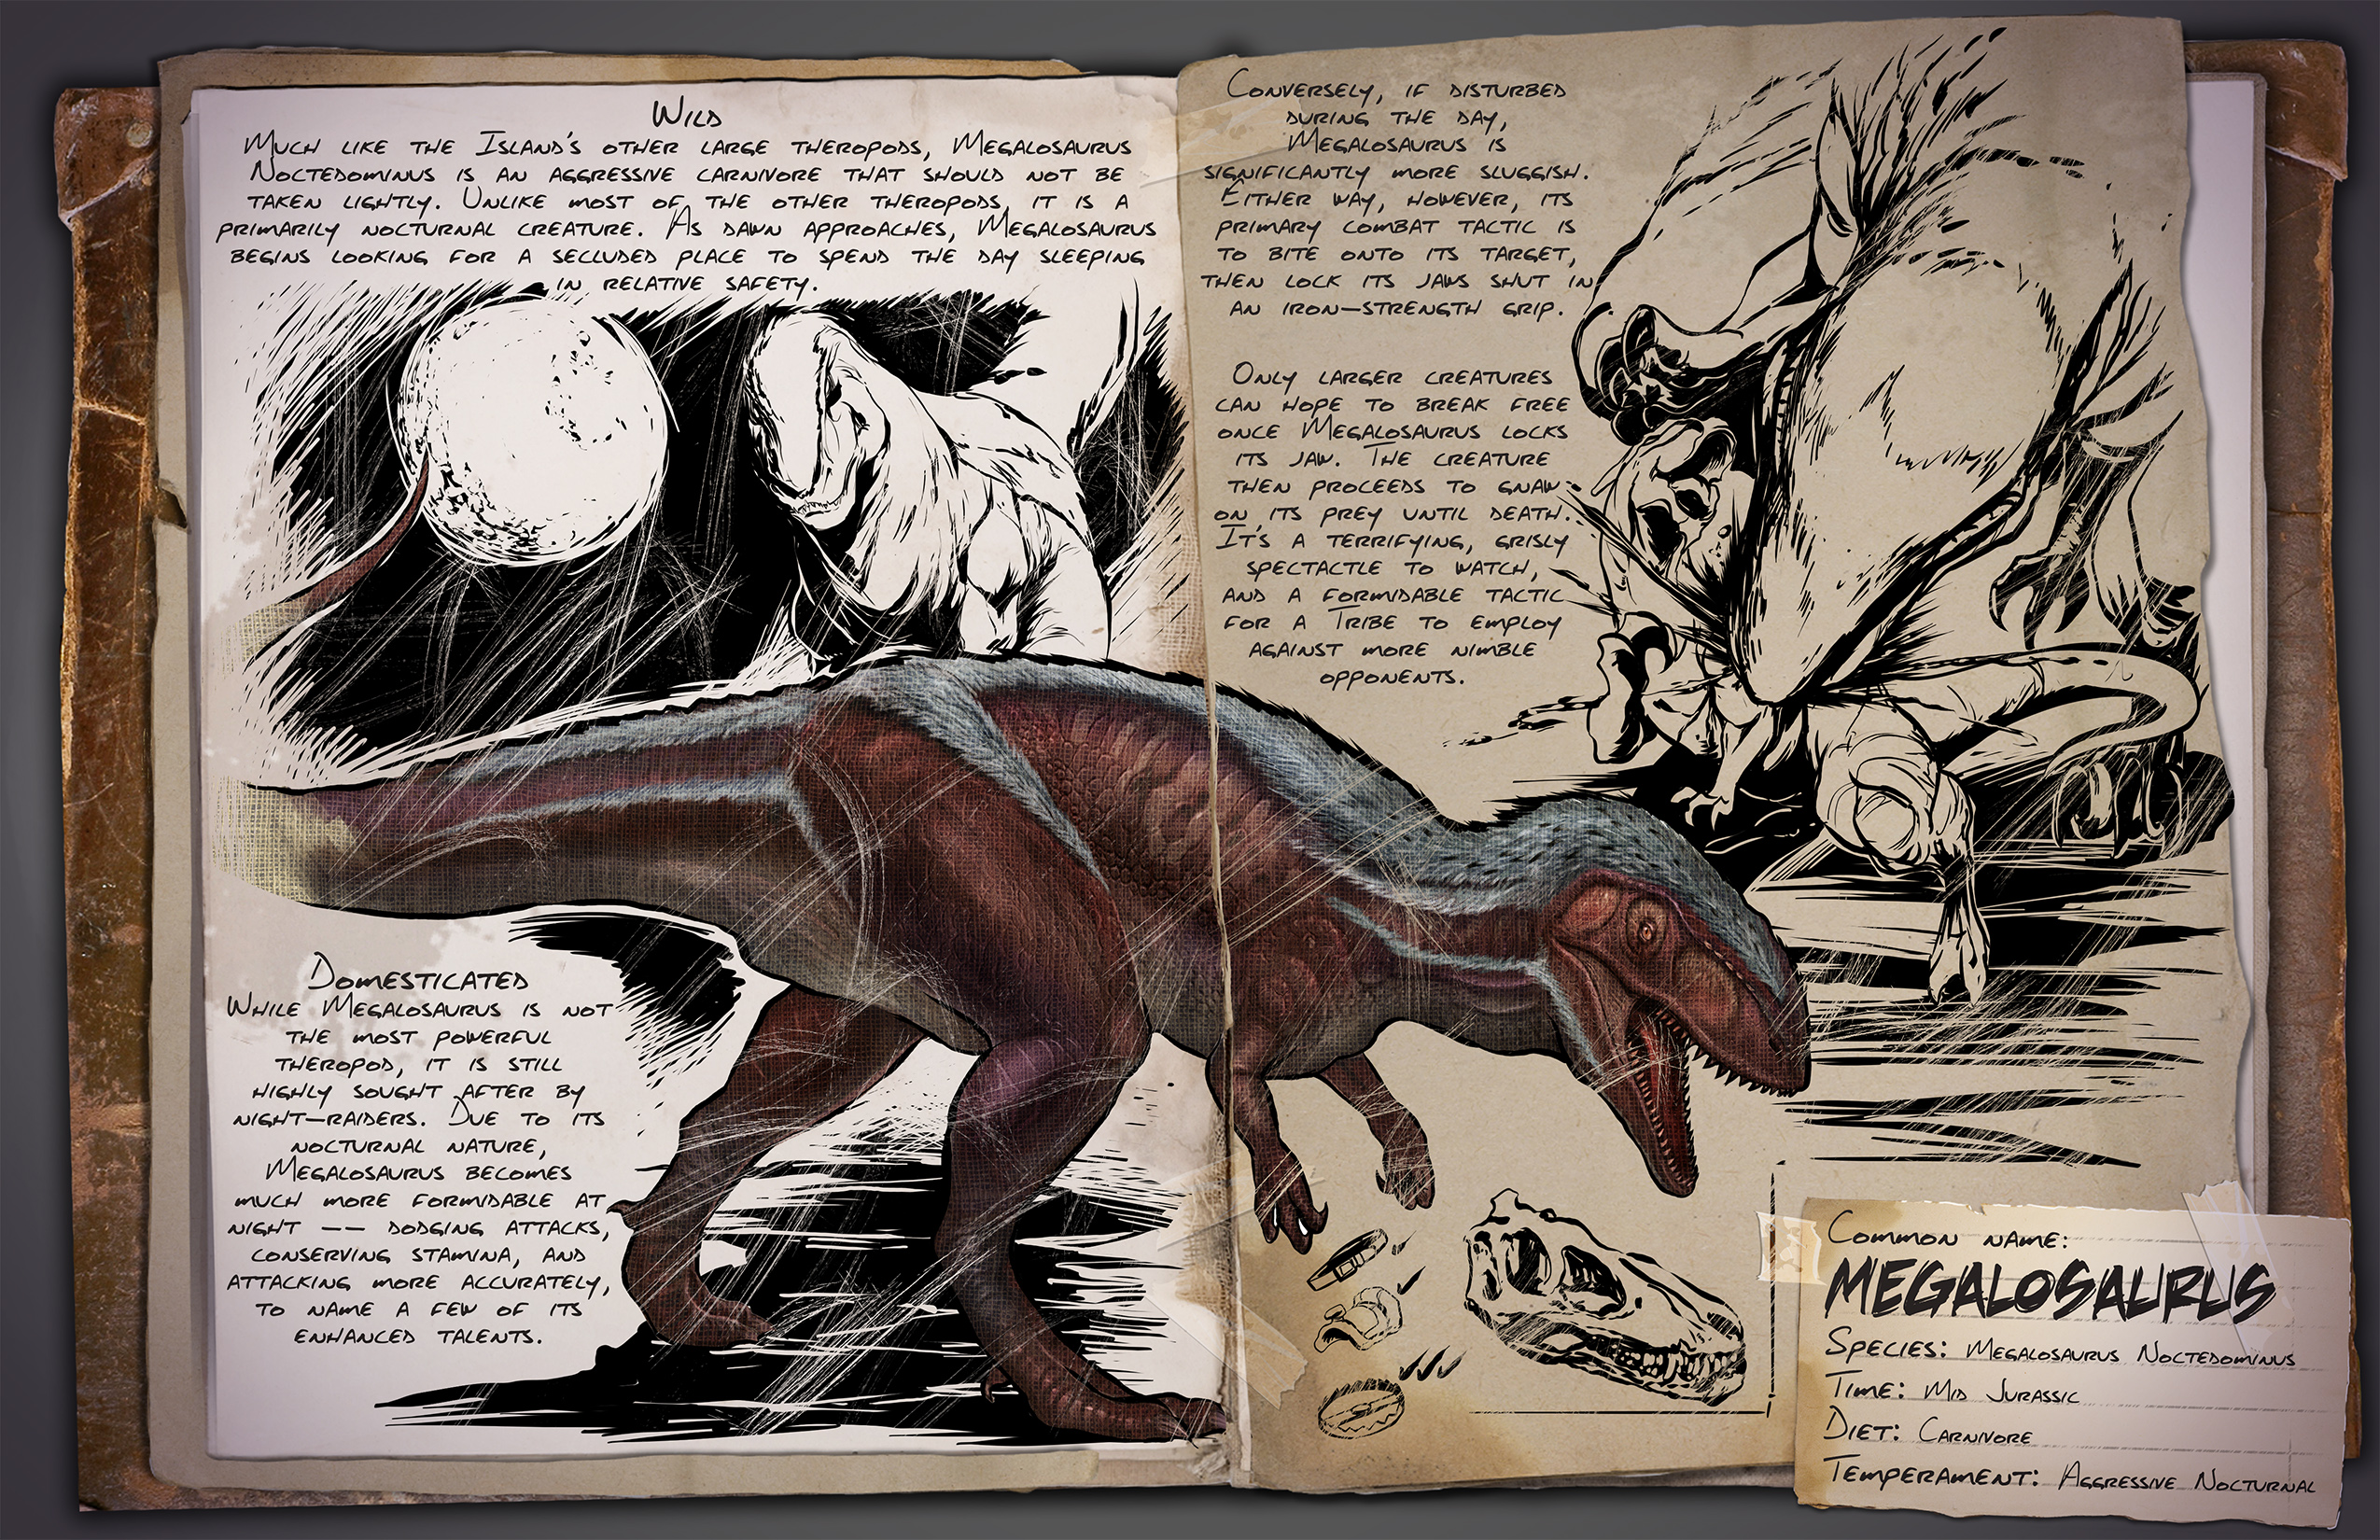 ARK: Evolved - [01/12/2016] Introducing the Megalosaurus! Steam